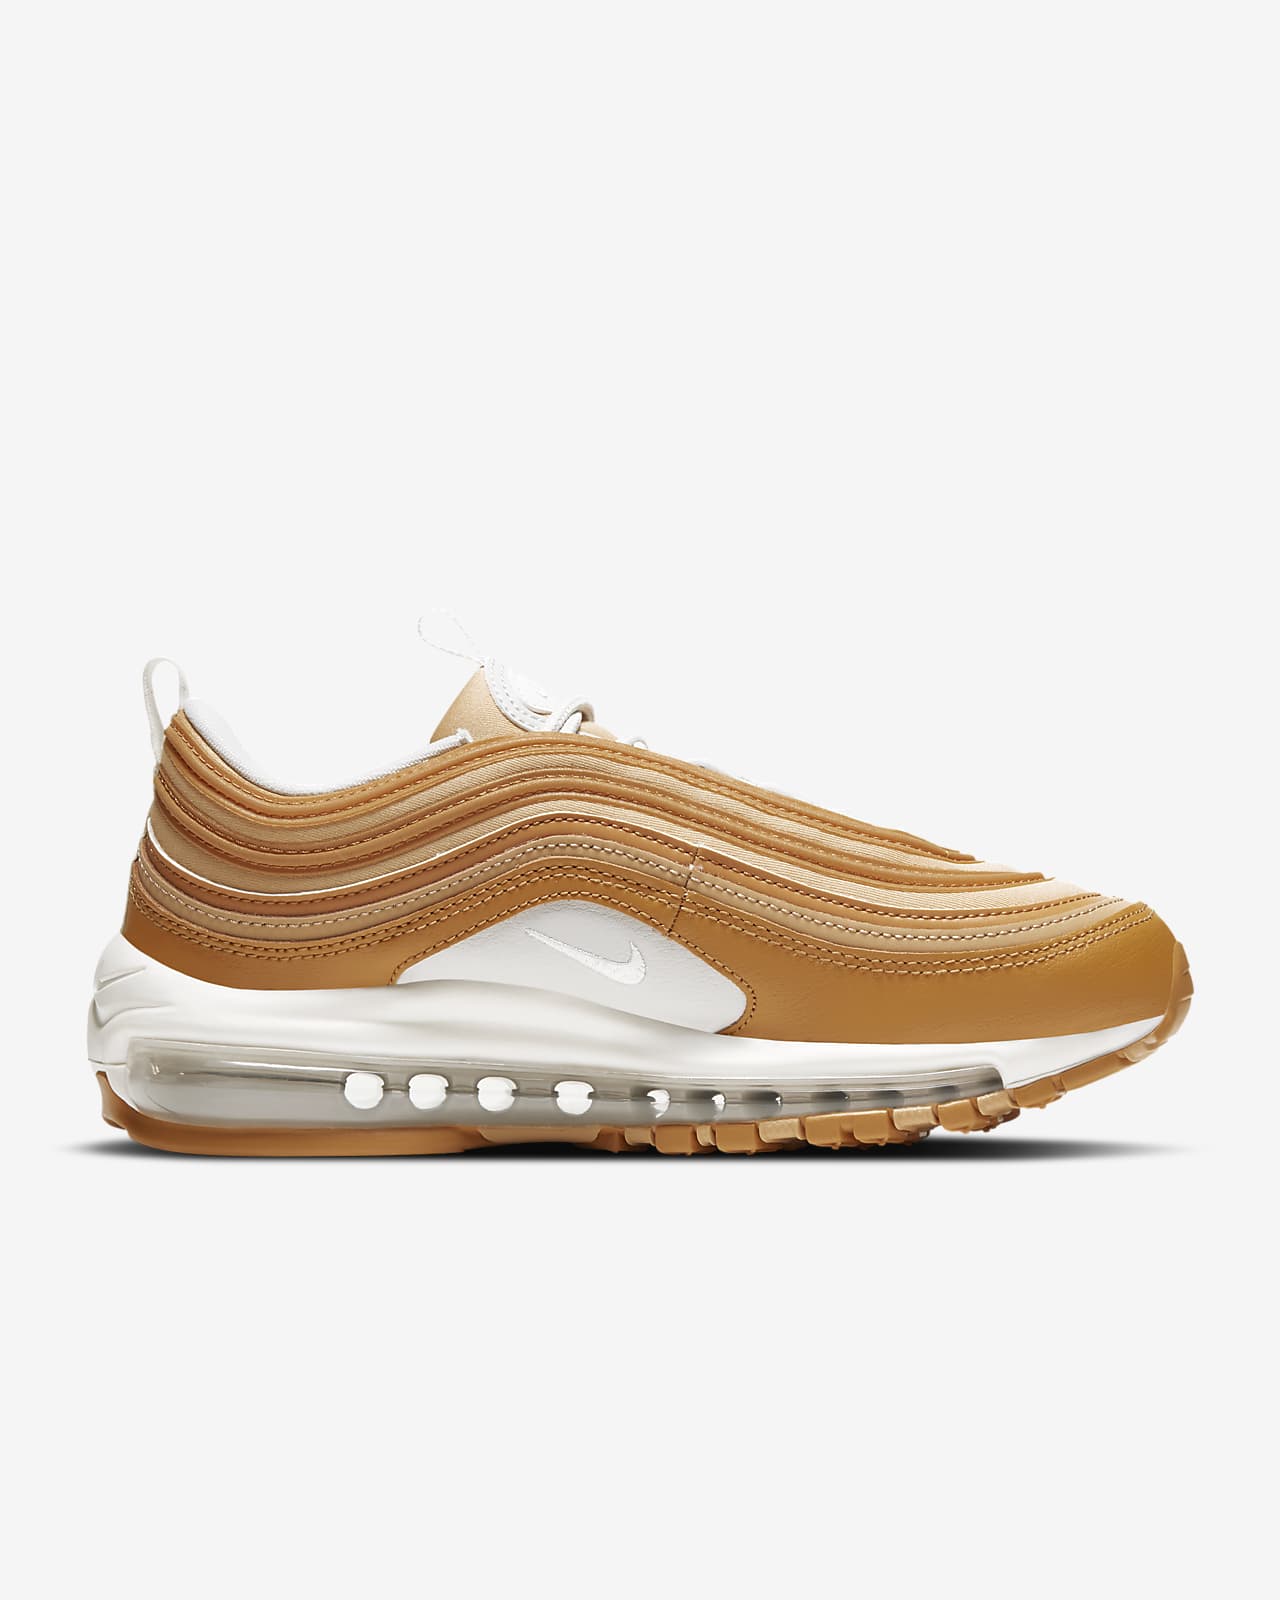 air max 97 size up or down